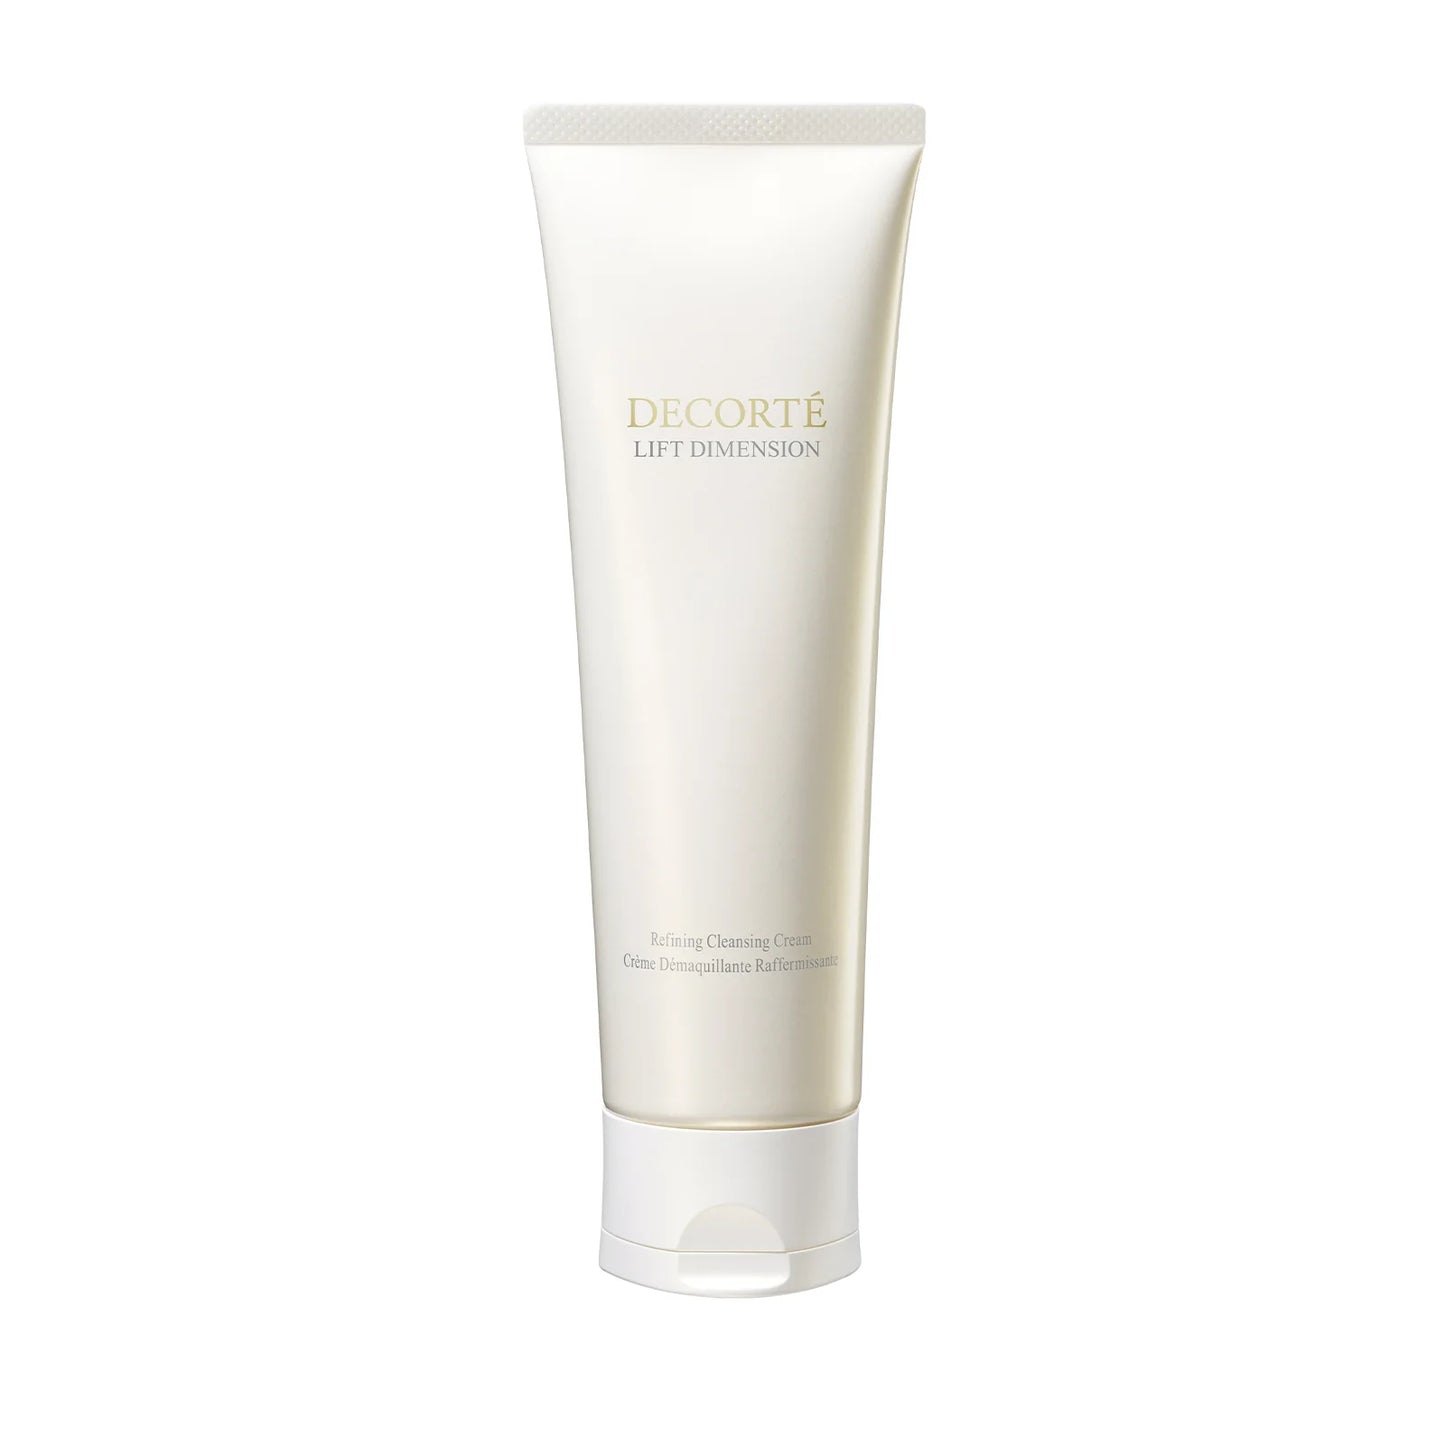 LIFT DIMENSION REFINING CLEANSING CREAM